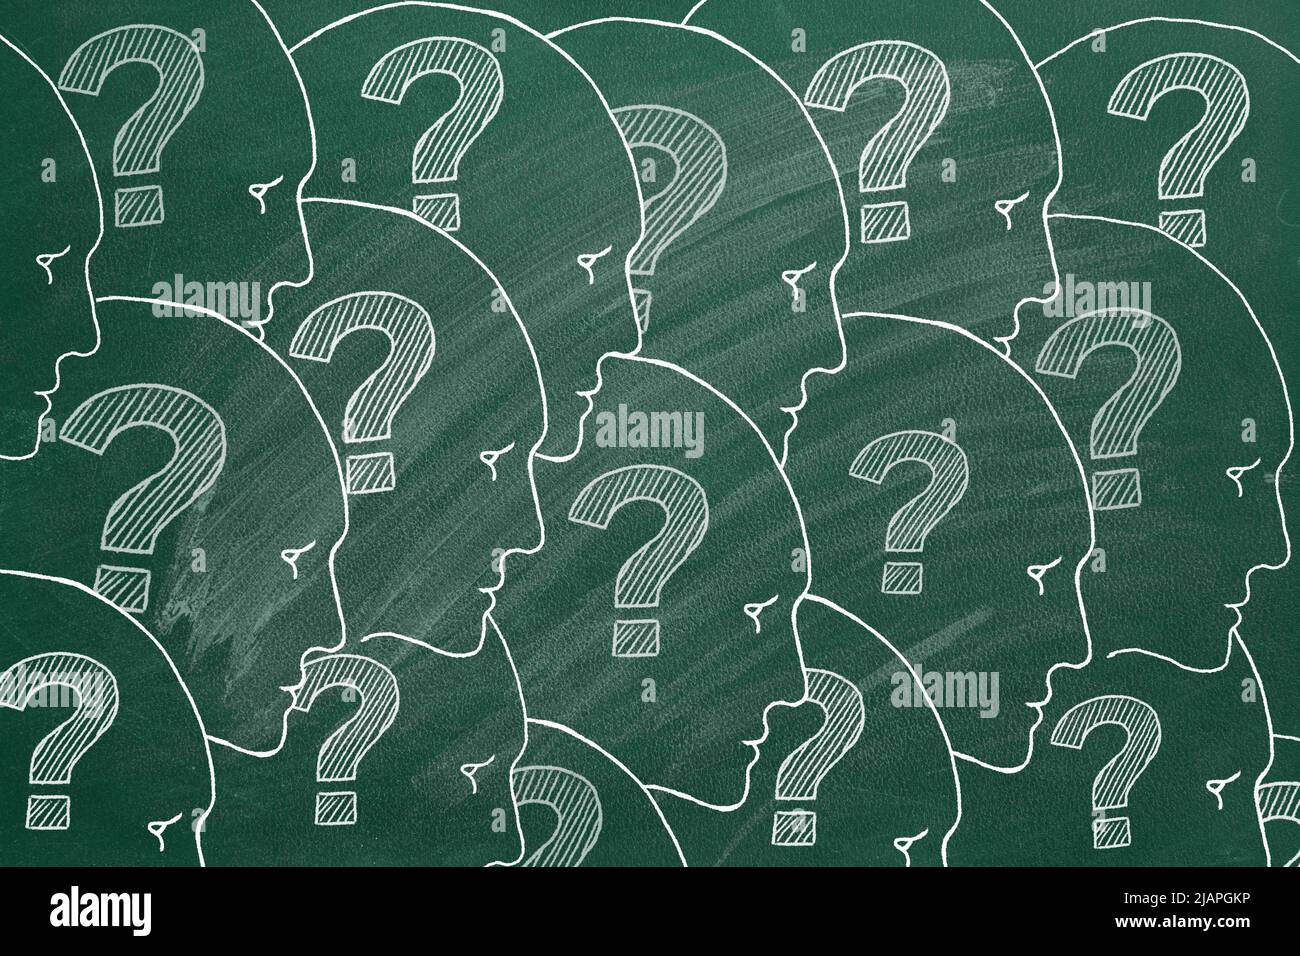 Human faces with question marks inside. Illustration on greenboard. Stock Photo